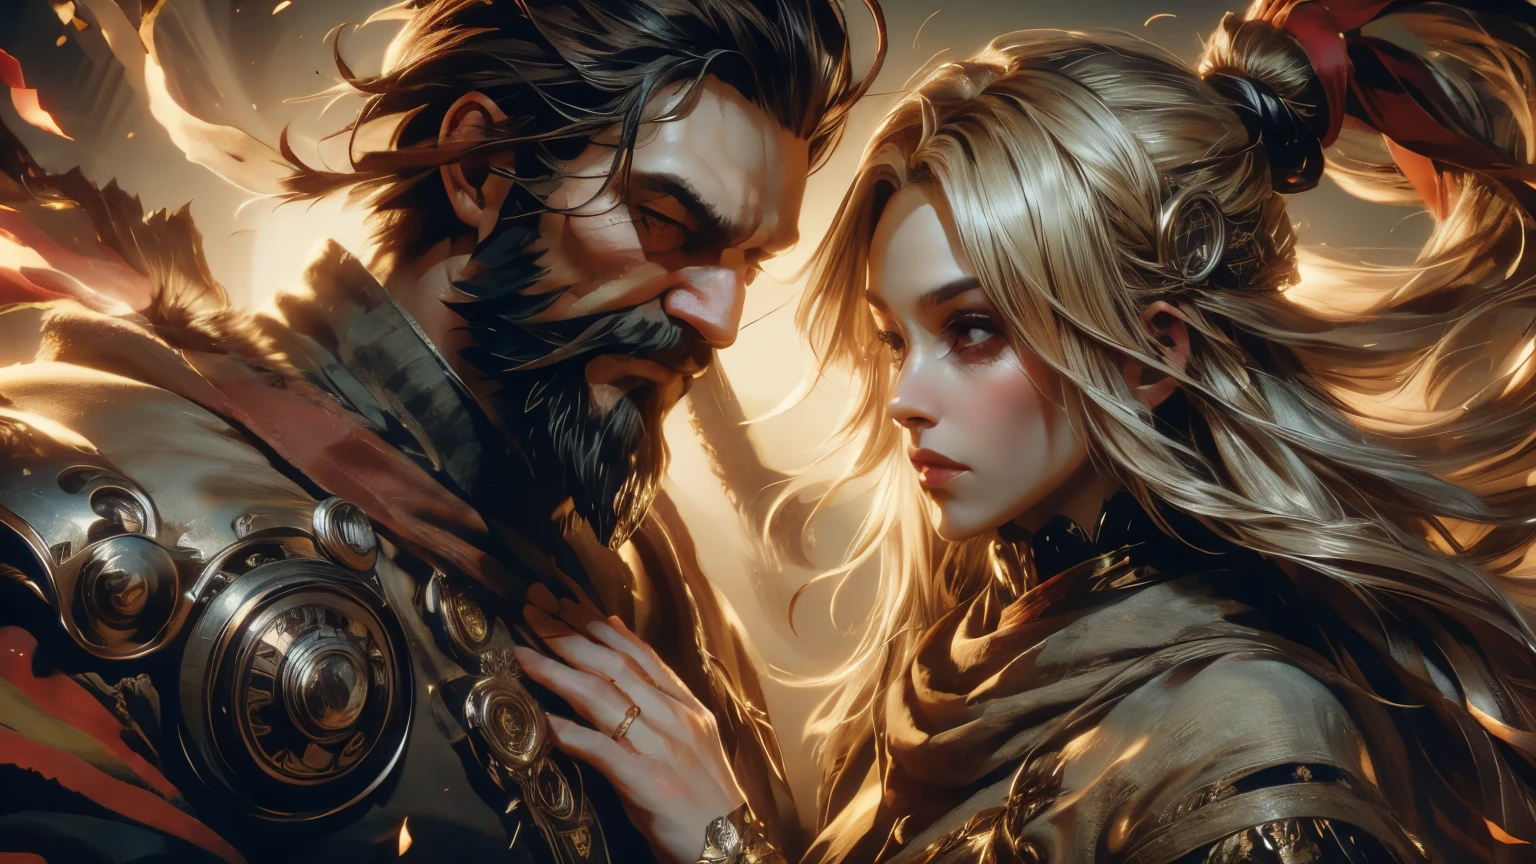 ((best quality)), (high detail), (original art), (1man), (1woman), (close up), (headshot), rugged face, 44 year old man with extremely short black hair and full thick beard, dark brown eyes, very intense gaze in his eyes, holding a woman with blond hair and brown eyes, (beautiful woman), embers of fire in the air, warrior spirit, HDR, 3D, digital art style.